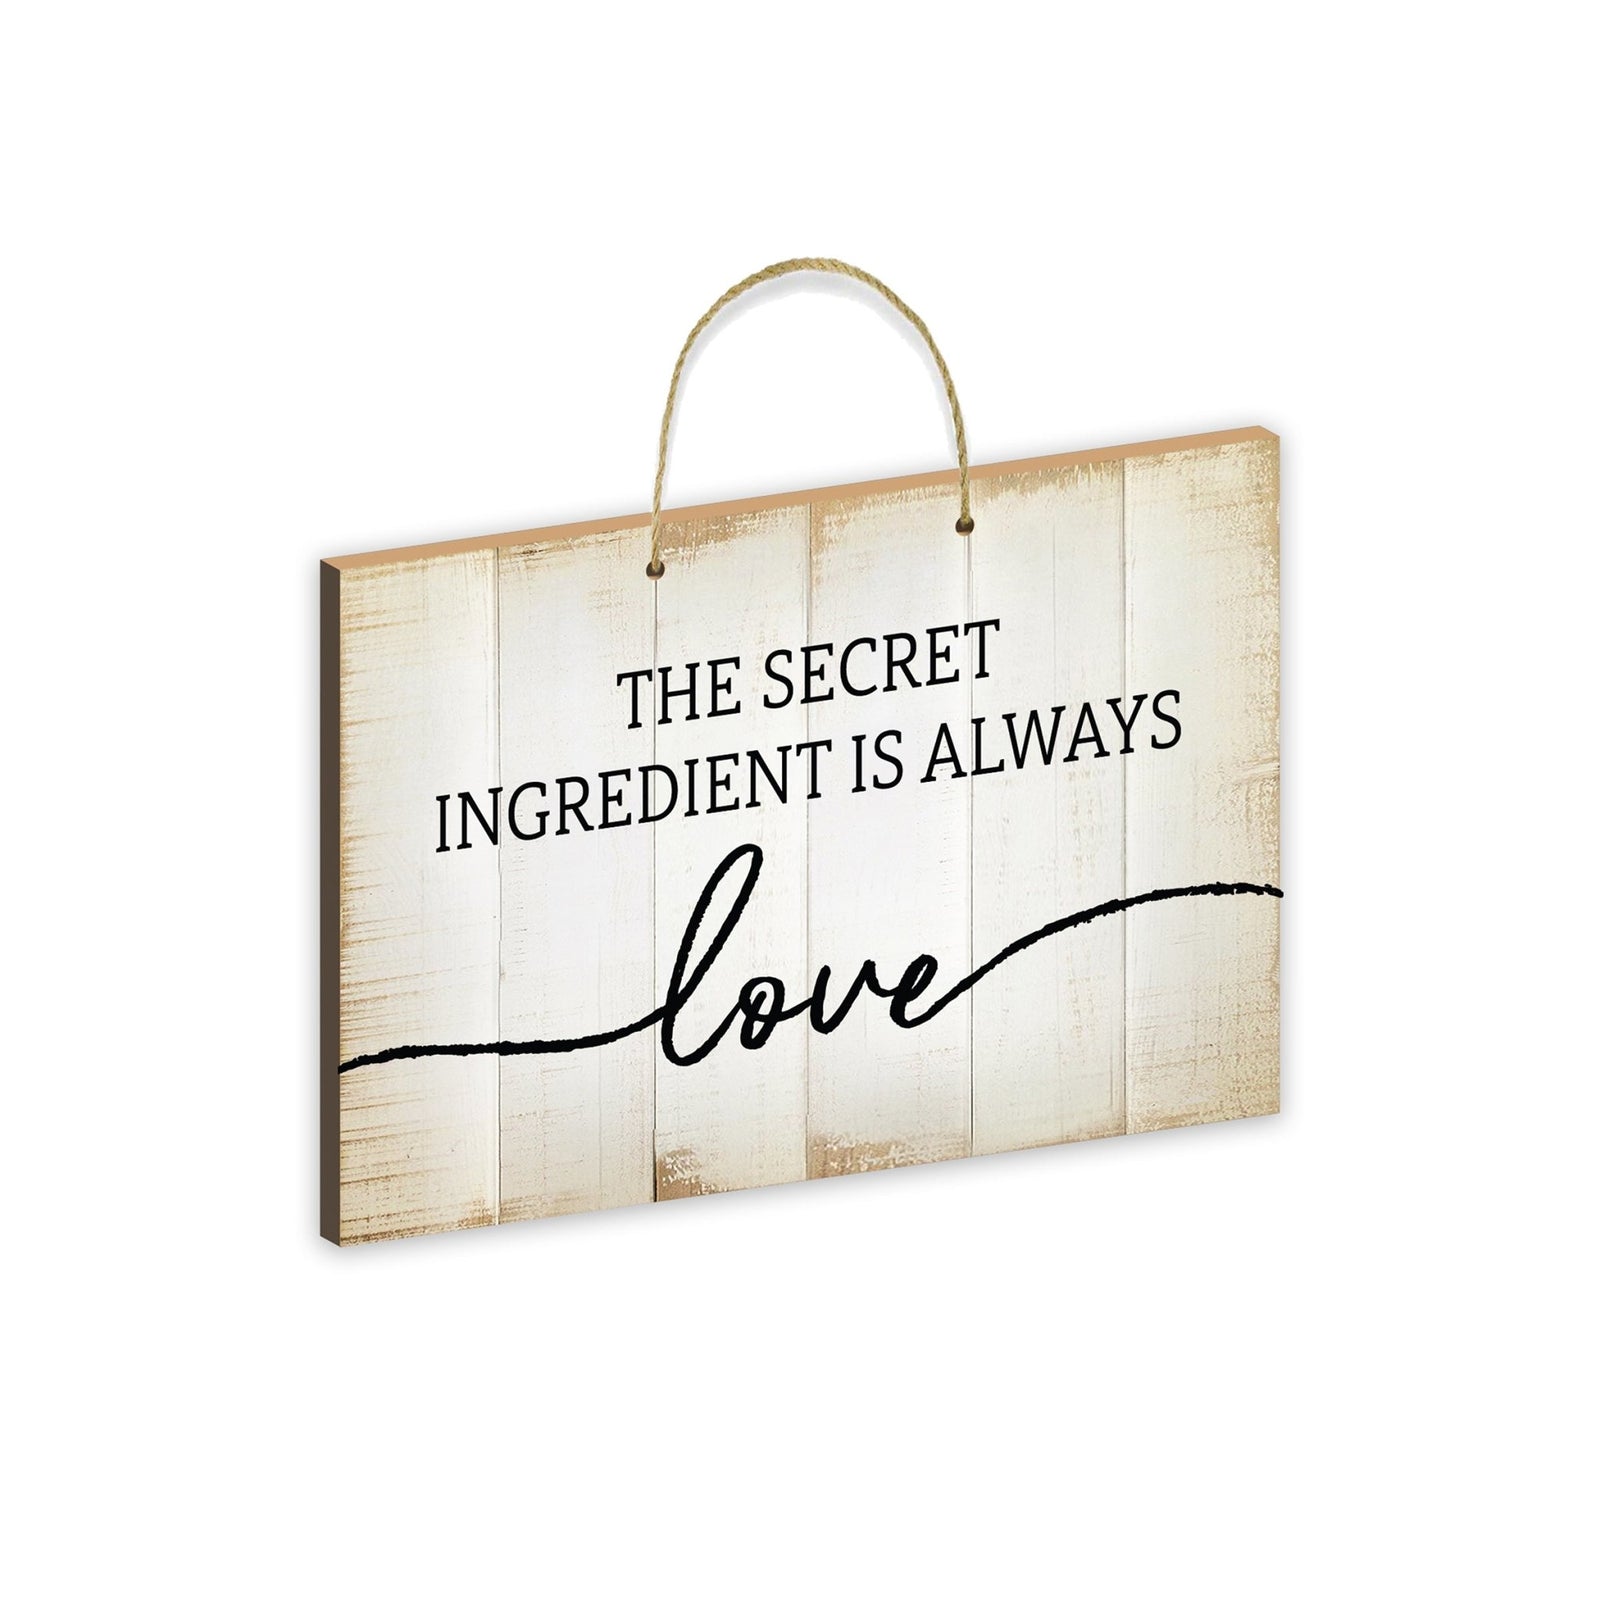 Inspirational Wooden Rustic Wall Hanging Rope Sign Kitchen Home Décor - The Secret Ingredient - LifeSong Milestonesav